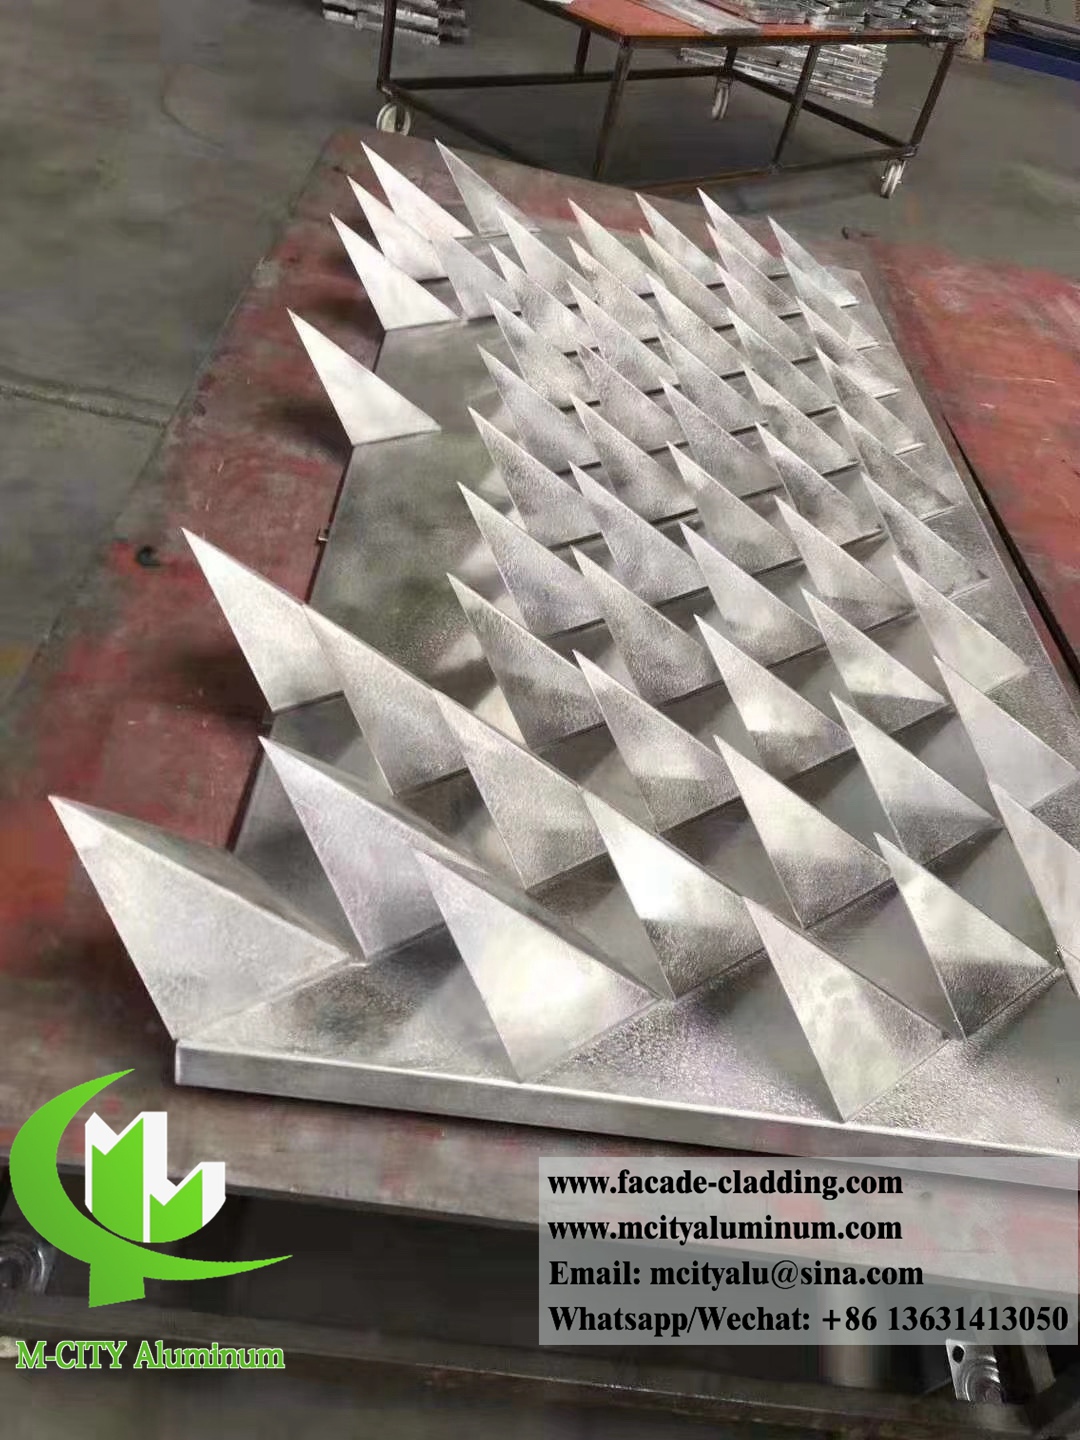 3D panel alulminum Architectural metal facade material China supplier aluminum panels for facades